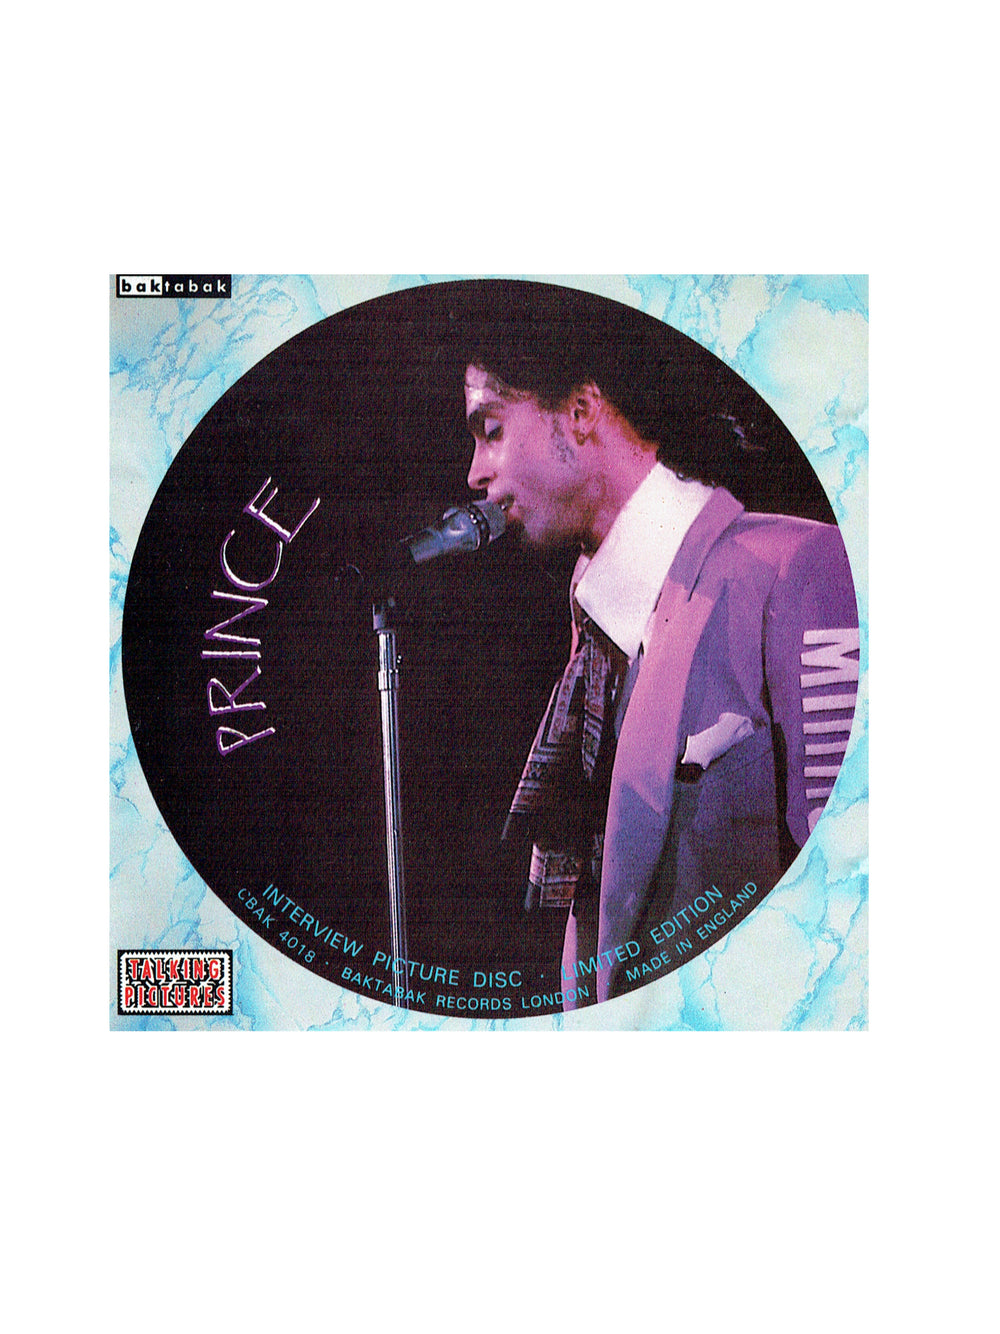 Prince – Interview CD Album Picture Disc UK Preloved: 1992